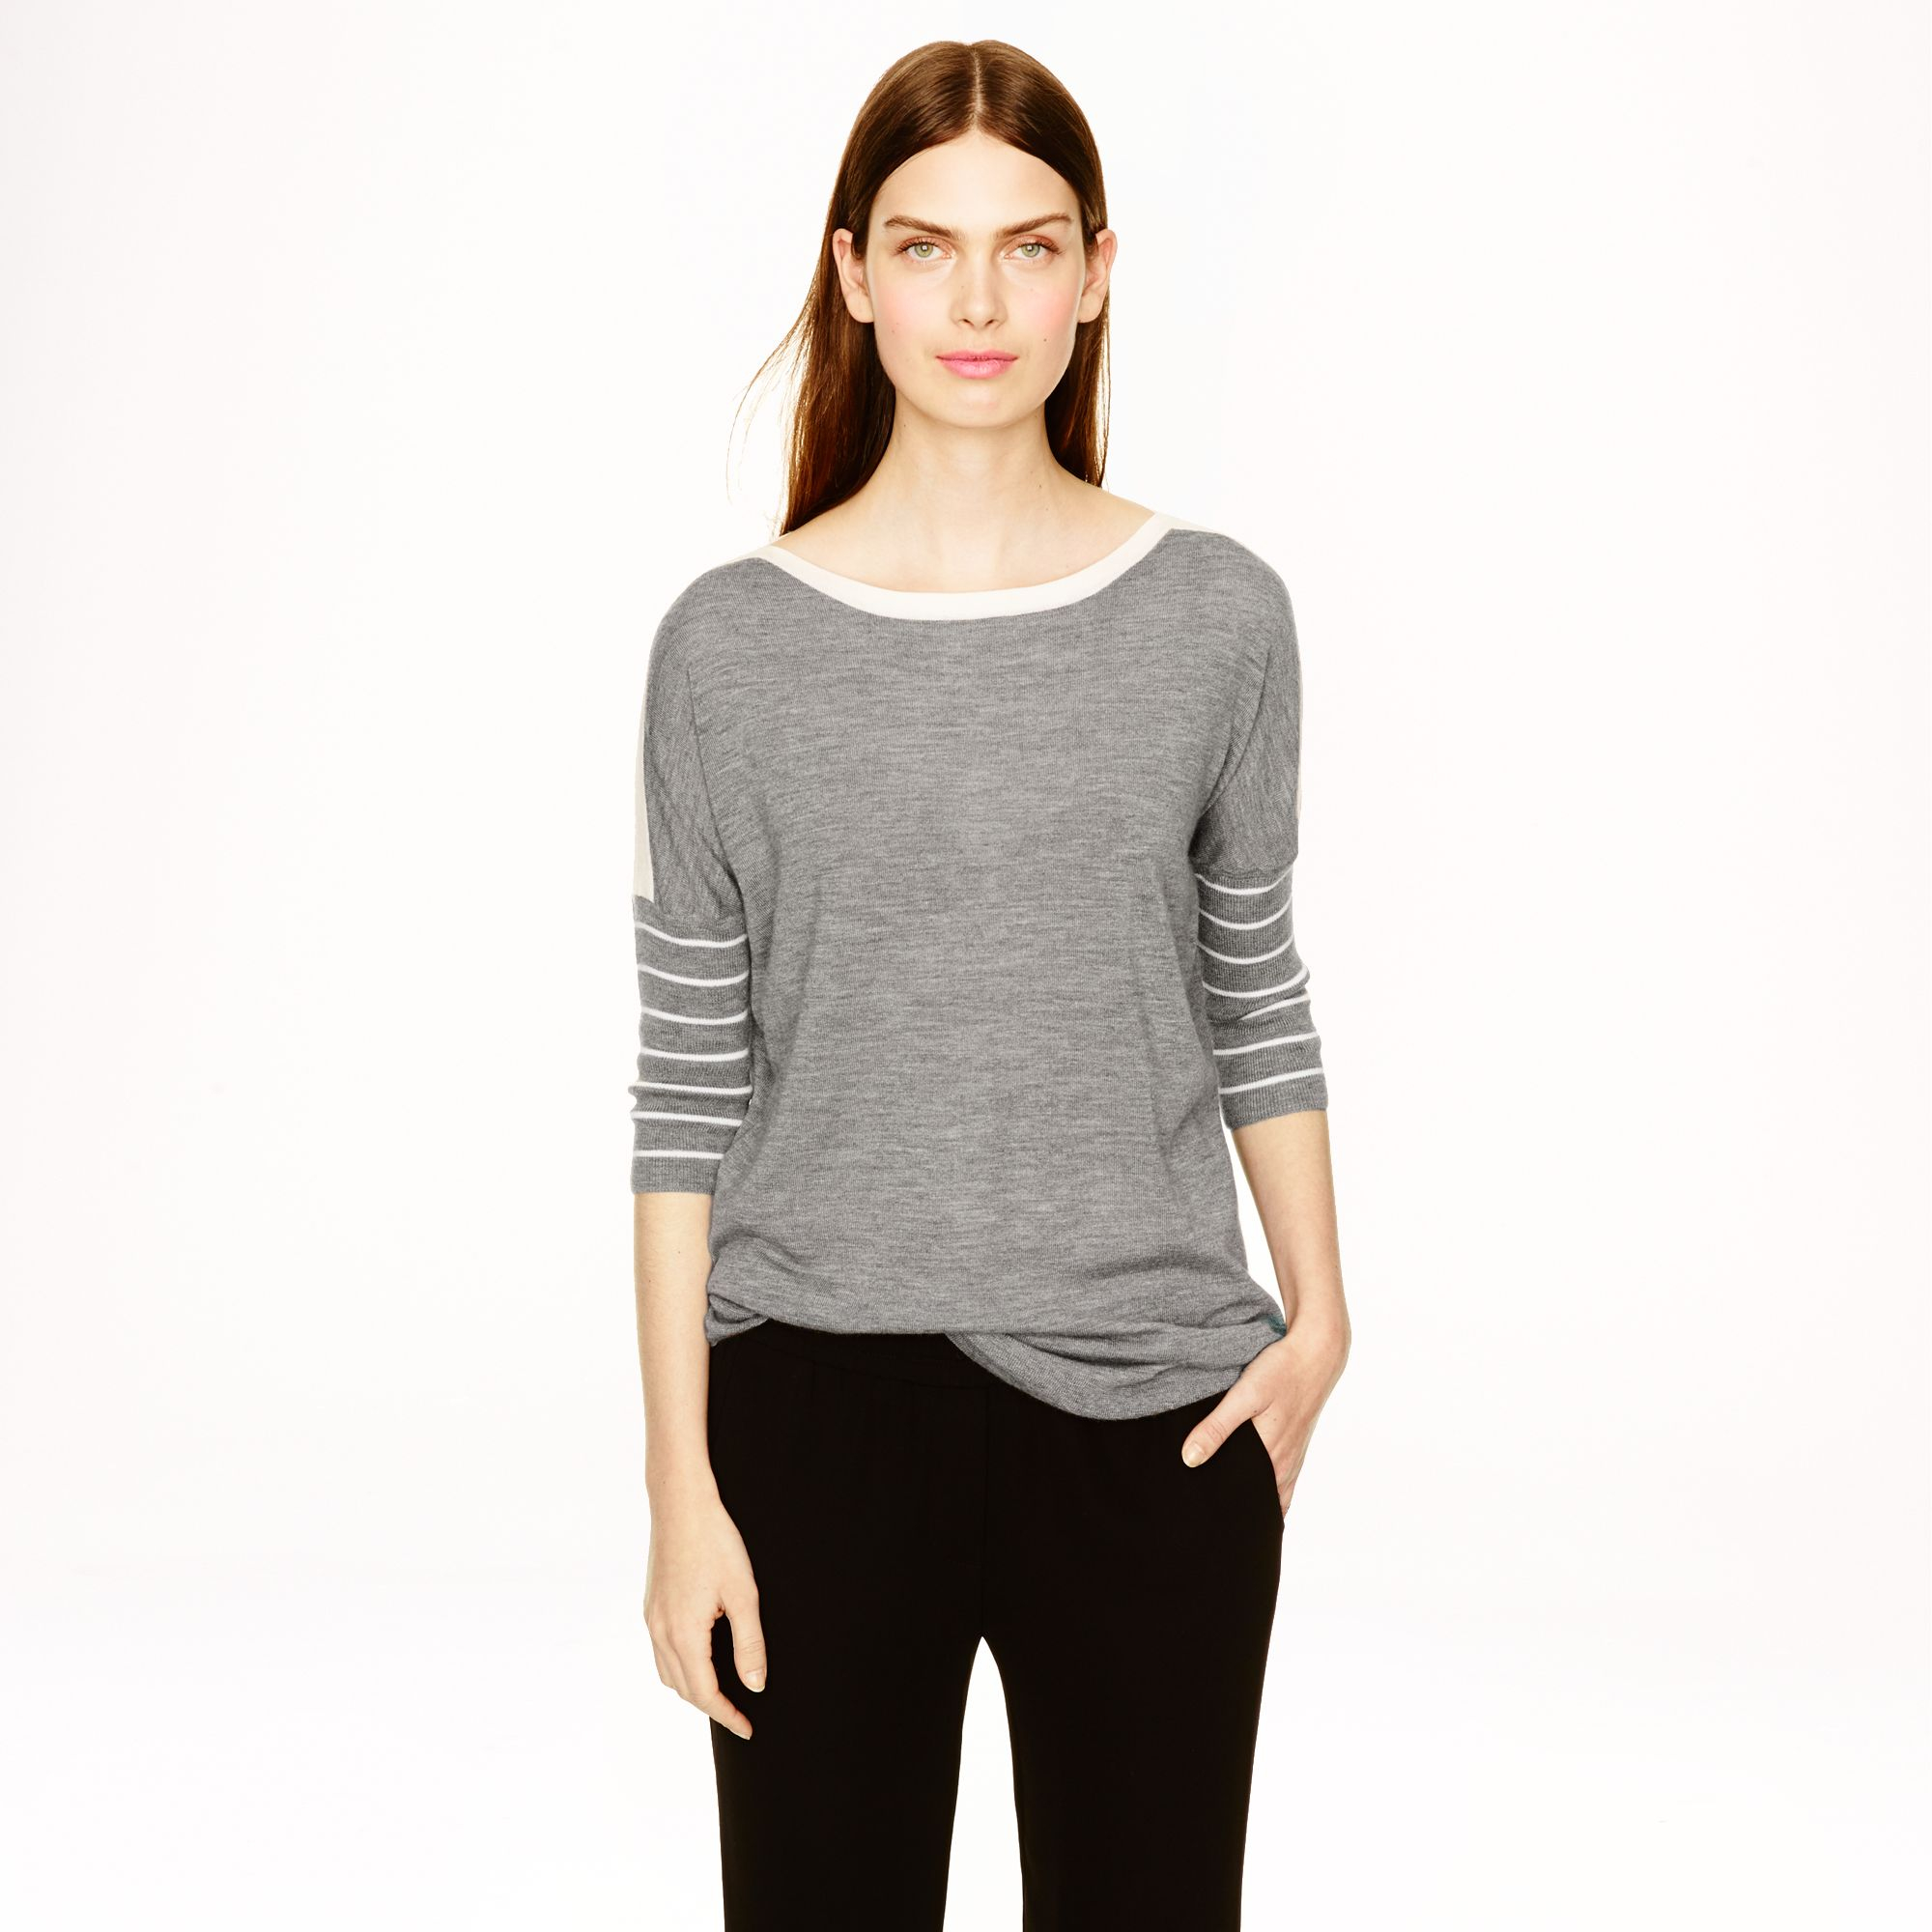 J.crew Collection Cashmere Drapey Boatneck Sweater in Stripe in Gray ...